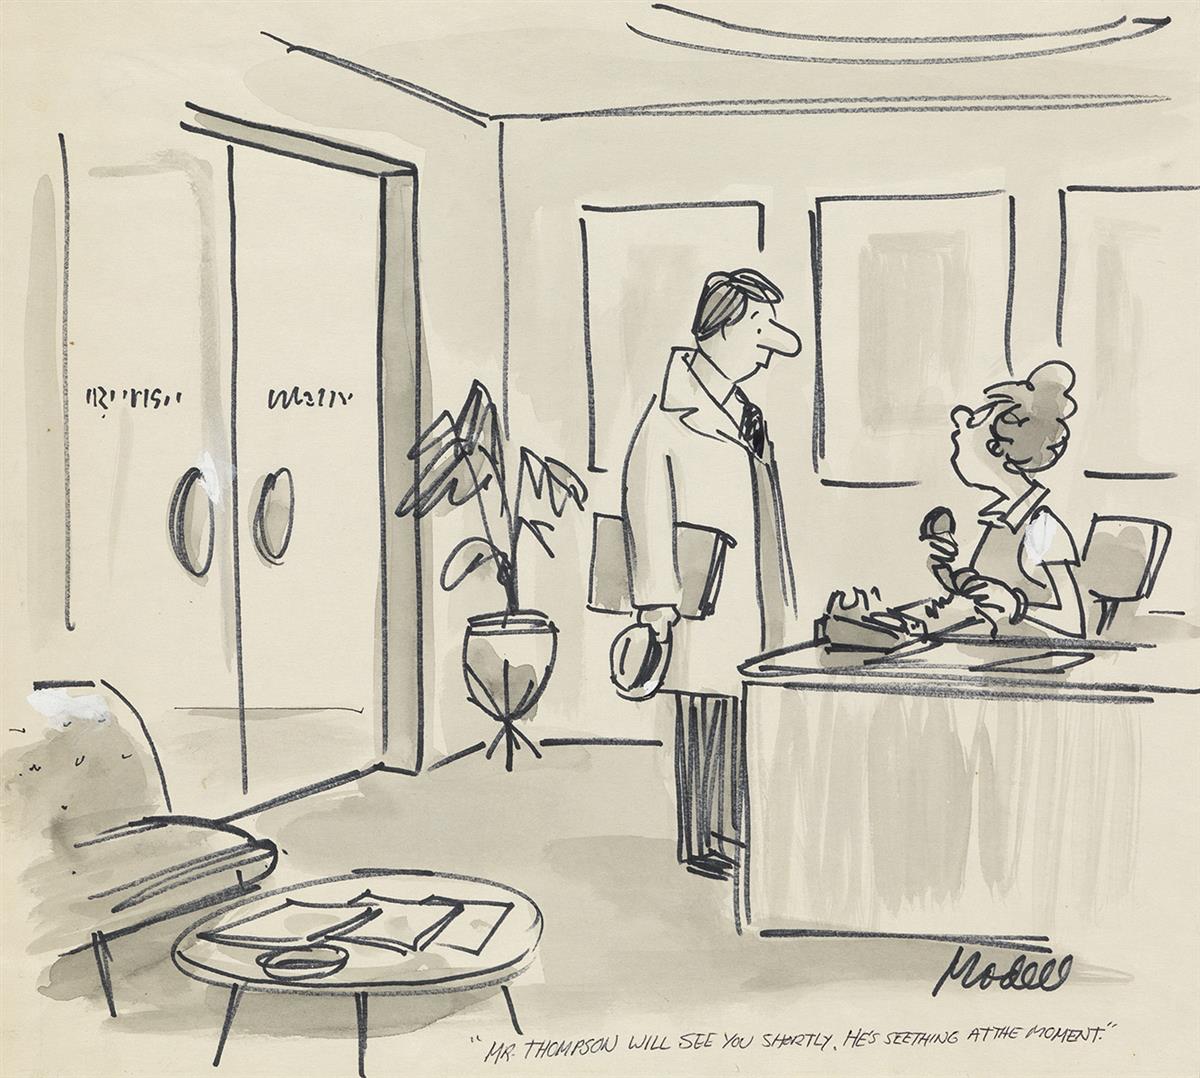 FRANK MODELL. (THE NEW YORKER / CARTOON) Mr. Thompson will see you shortly. Hes seething at the moment.